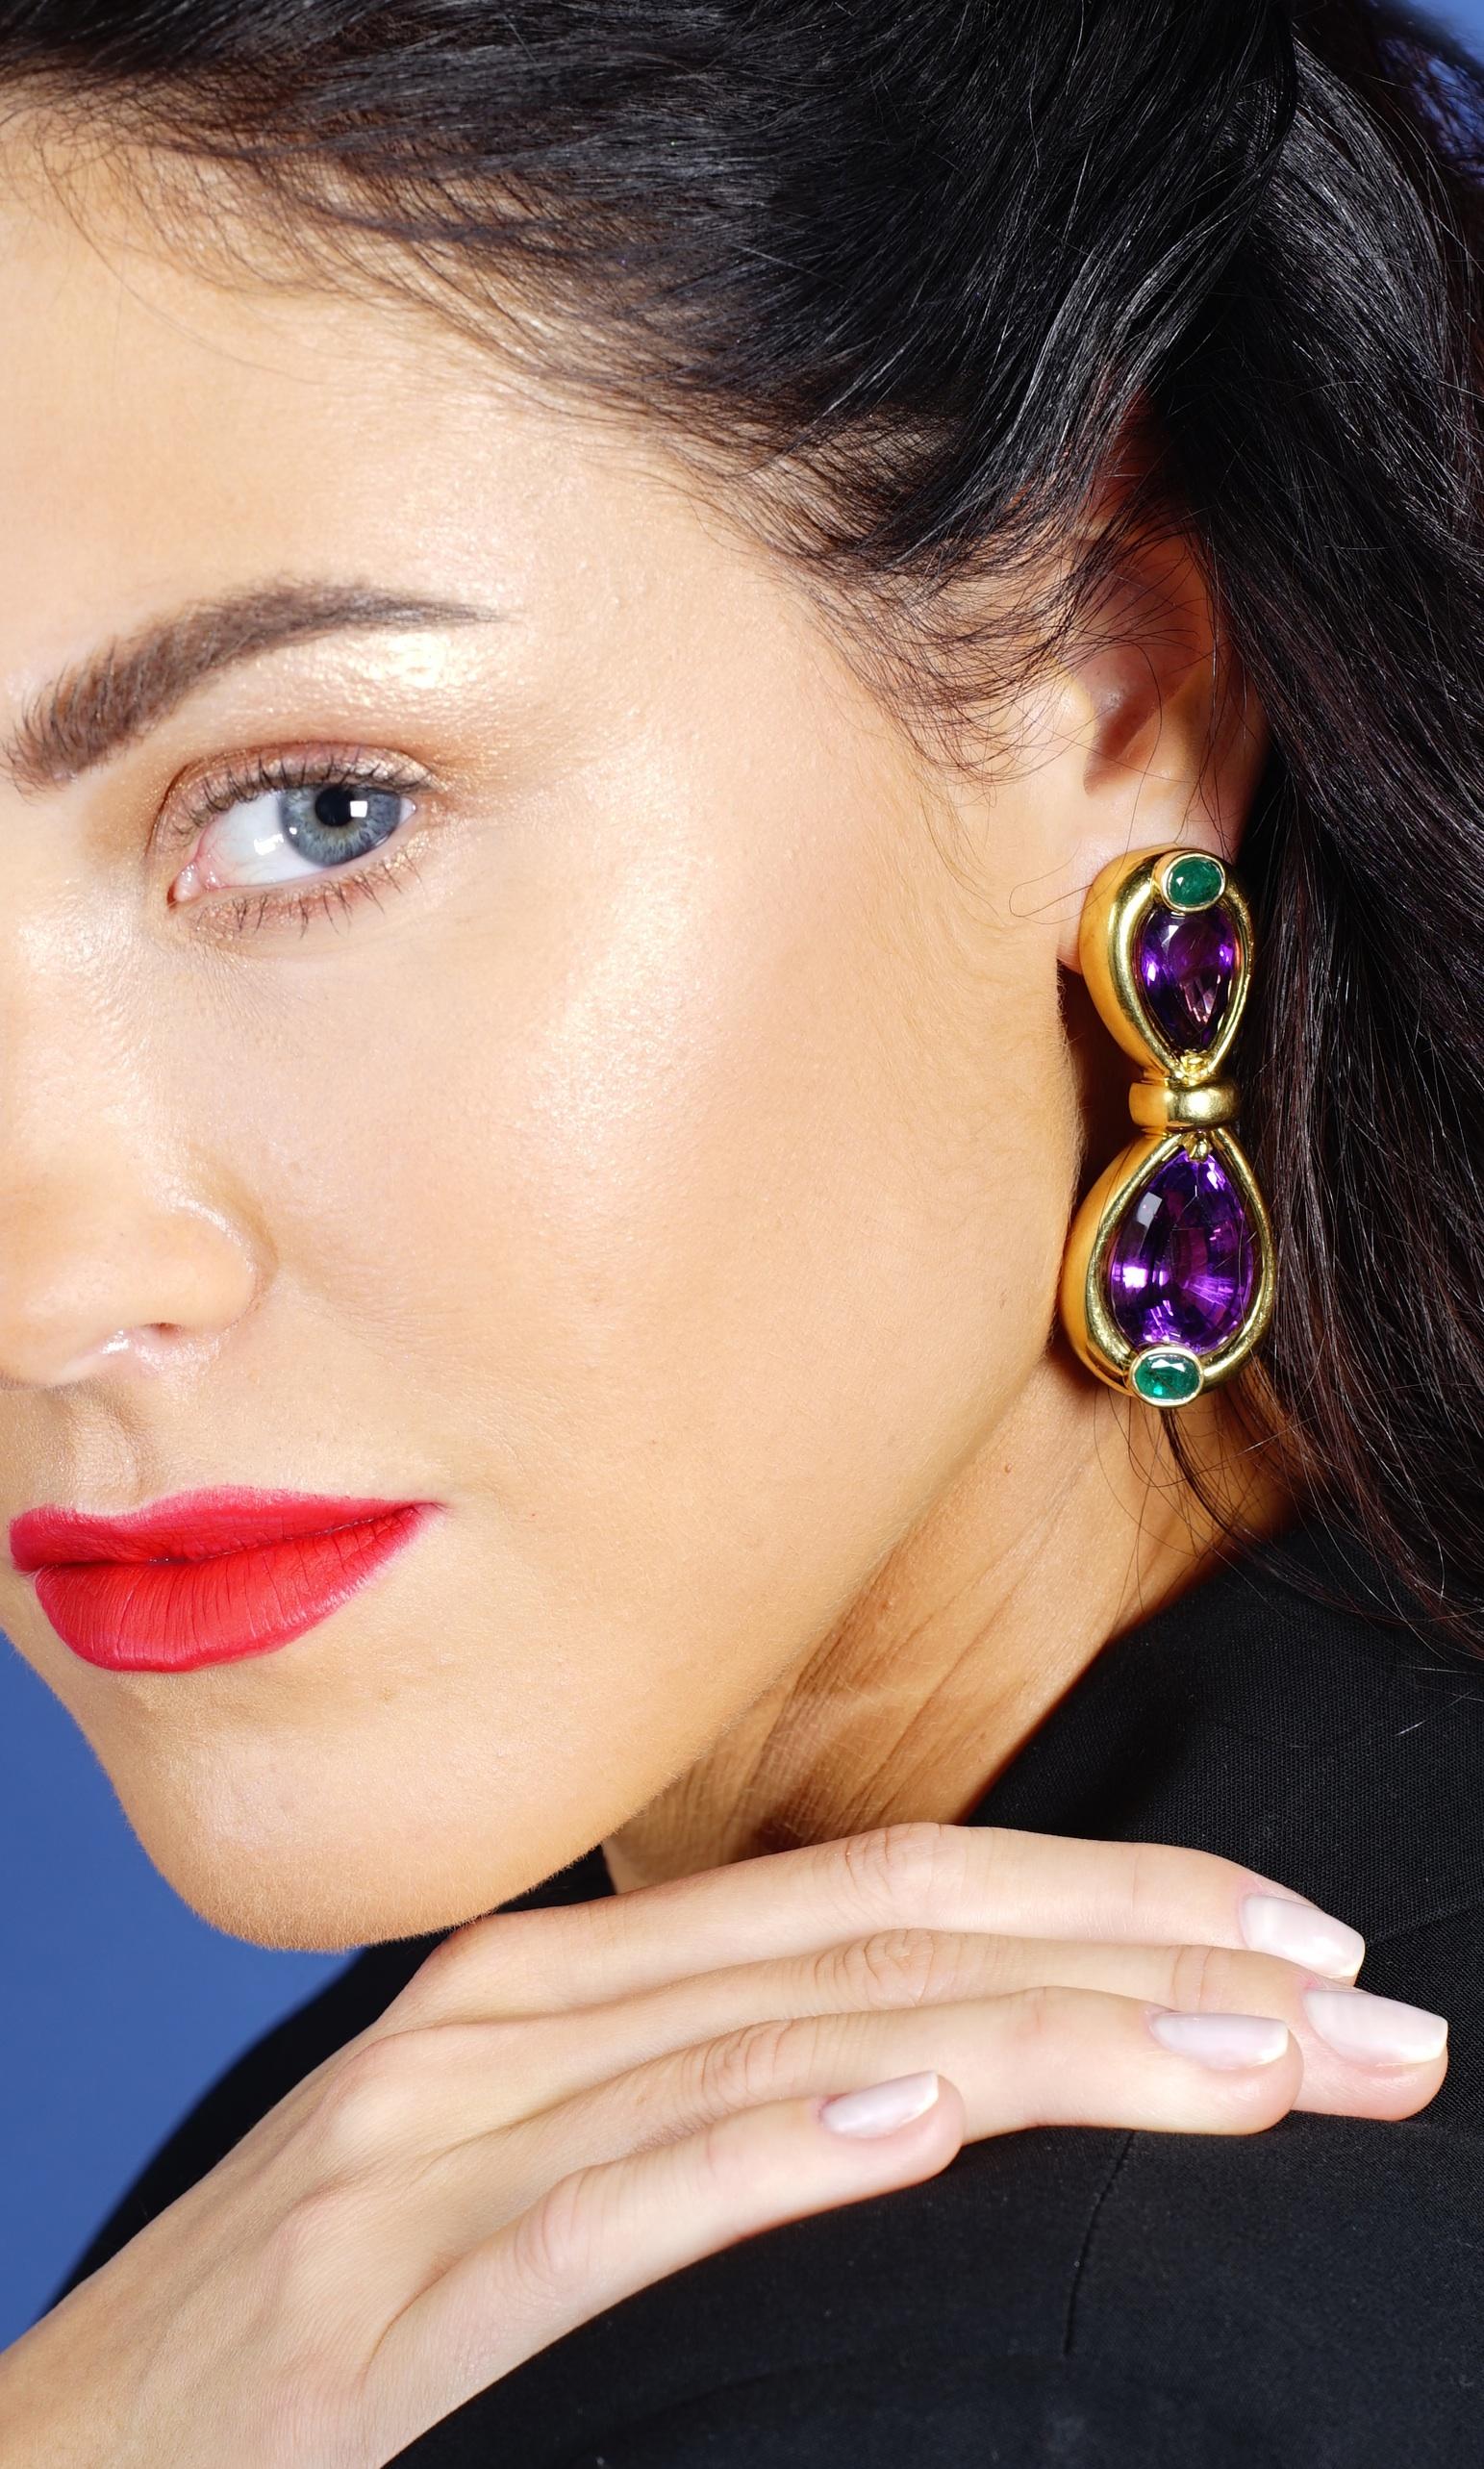 So Sexy and Fashionable! Those Earrings are handsome for your Summer in the French Riviera, with four oval Emerald and four impressive size Pear shape Amethysts on yellow gold 18k.
Signed Verney.
Total height: 2.36 inches (6.00 centimeters).

Total